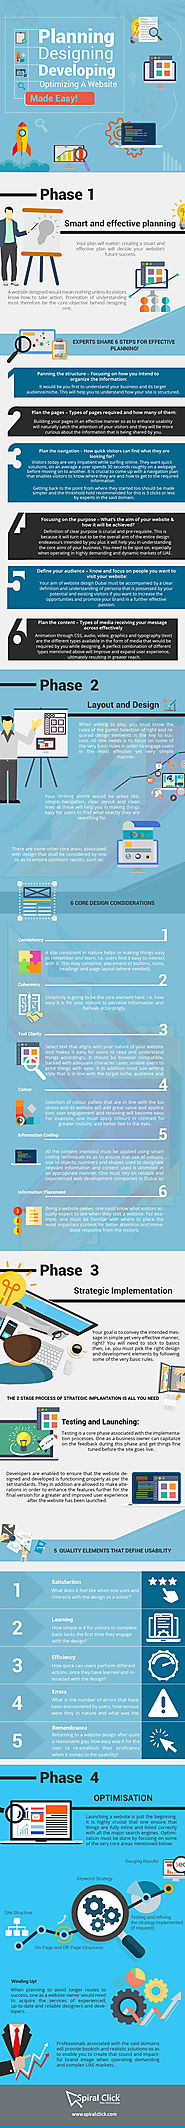 4 Phases To A Professional Website Design, Development And Optimization – Latest Website Design, Development, Mobile ...